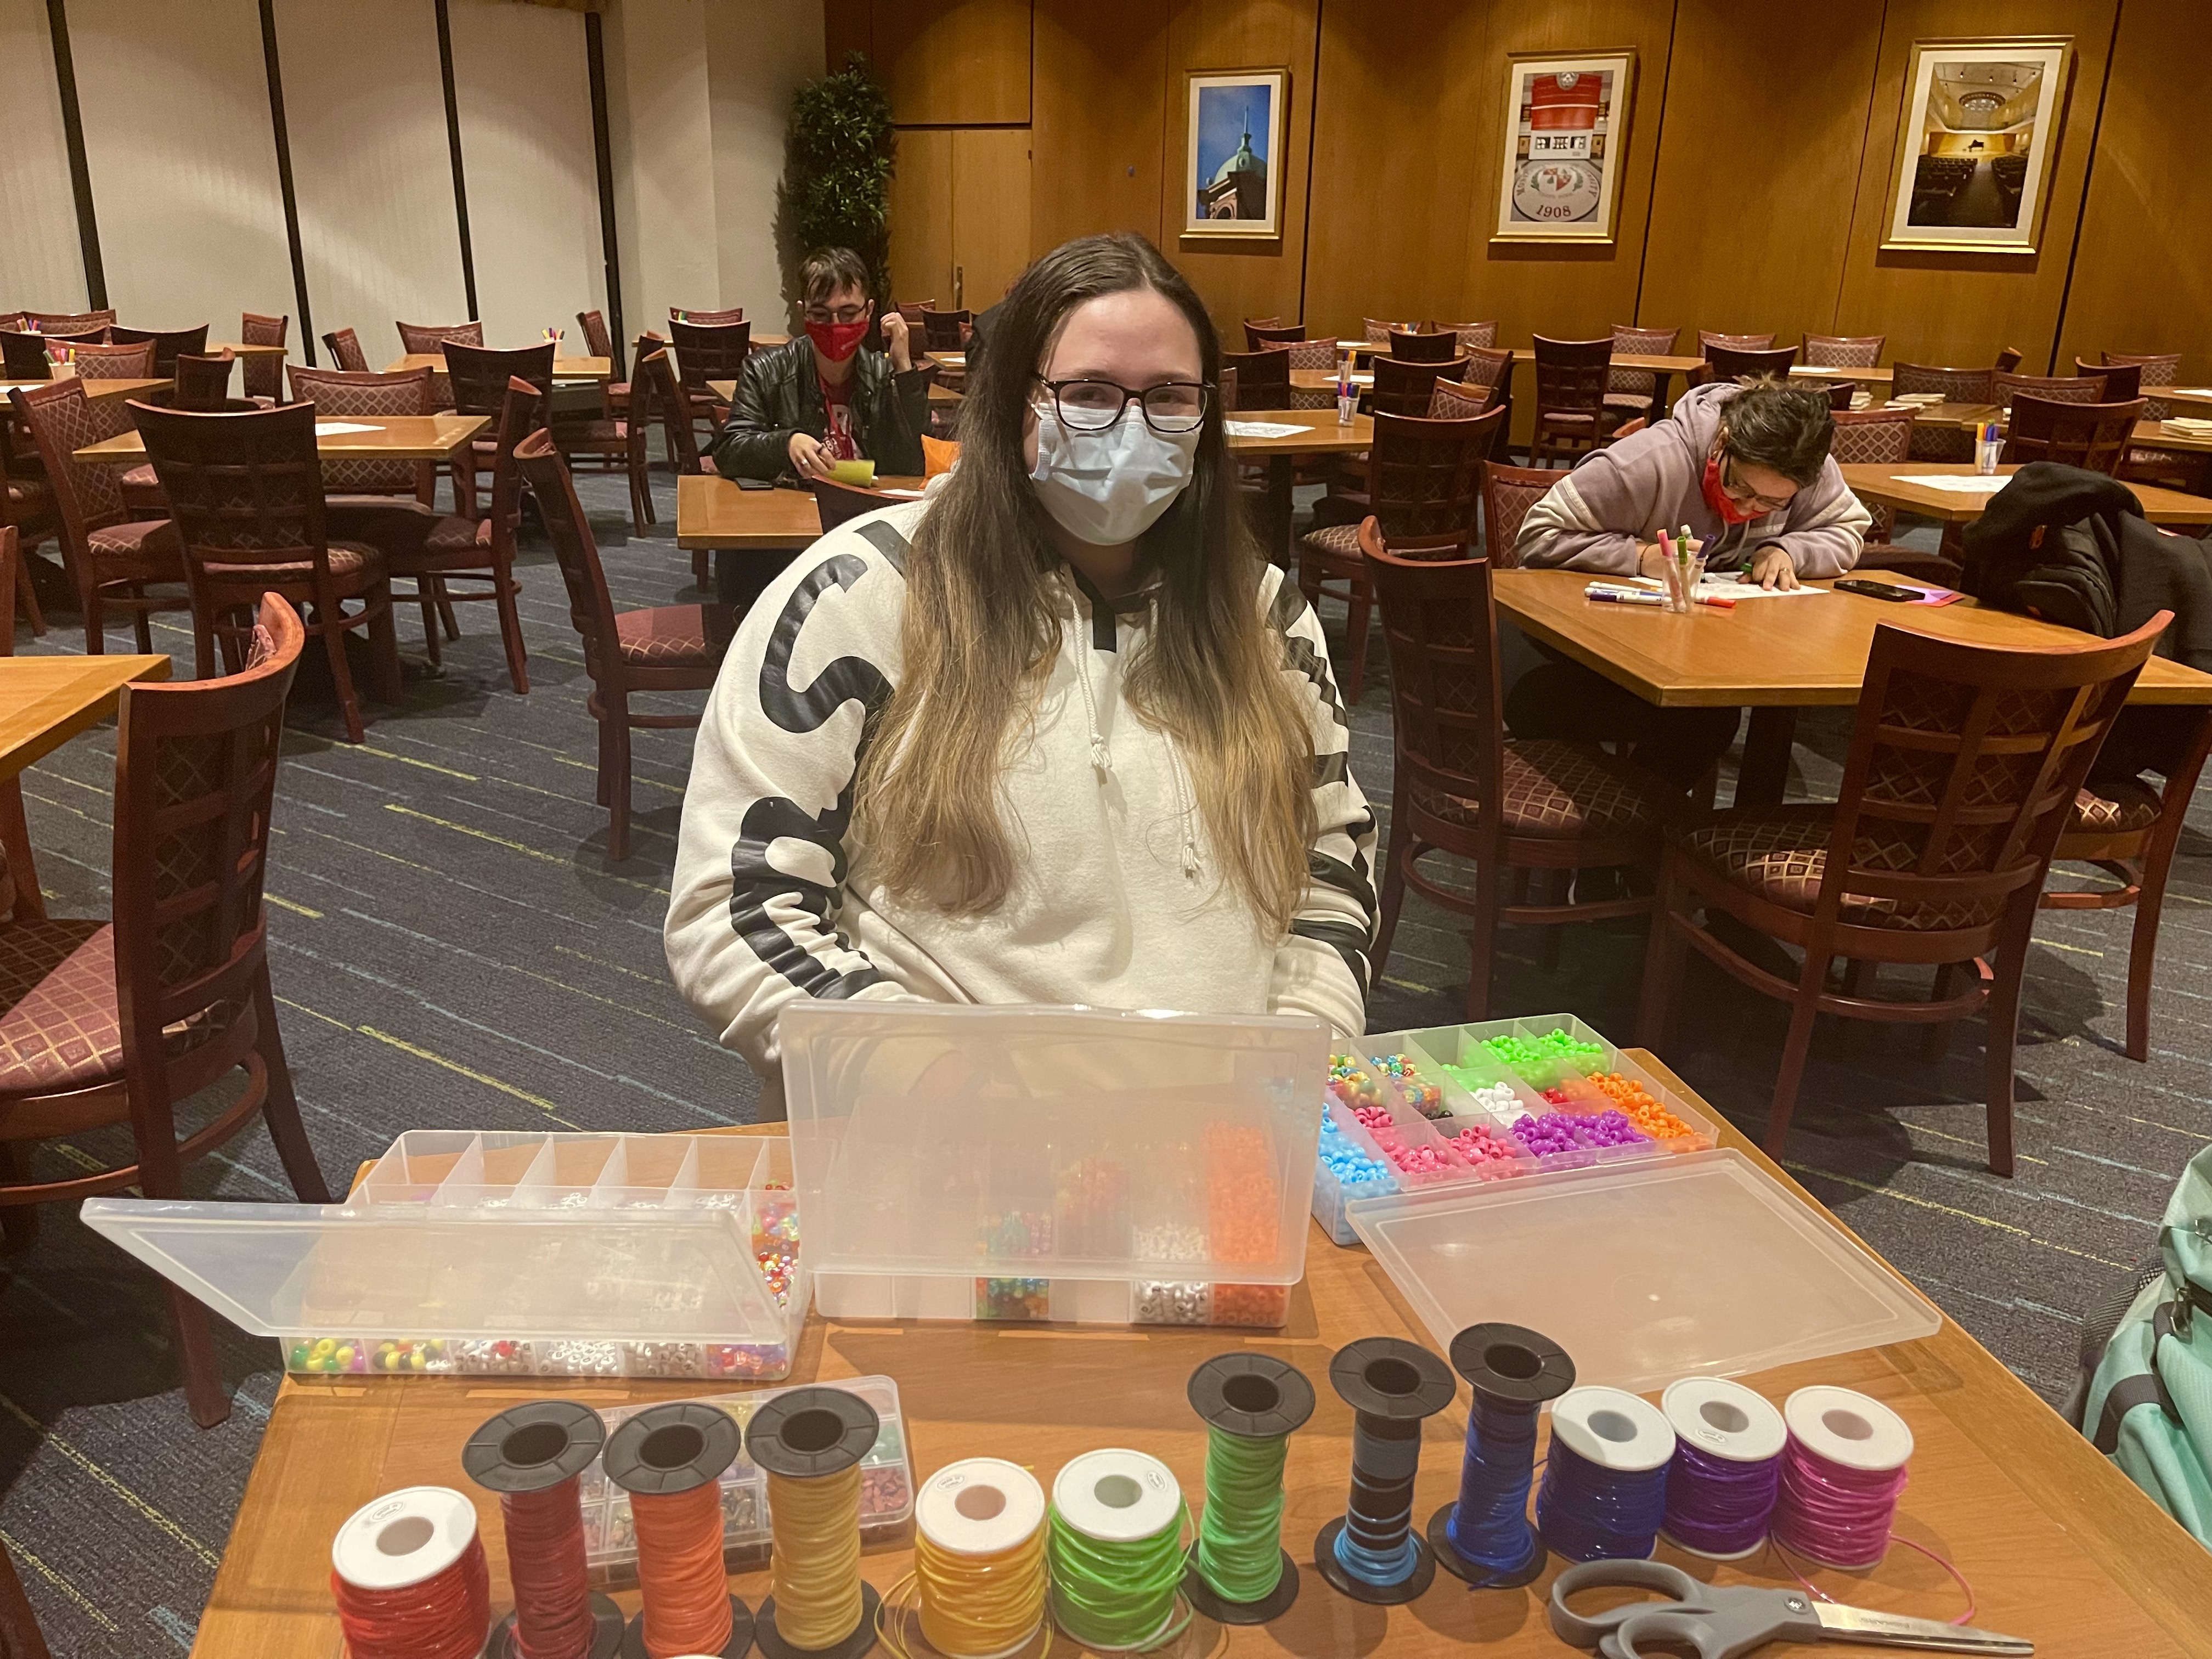 Jess Parnas, a senior business major, wanted this event to help students release their stress.